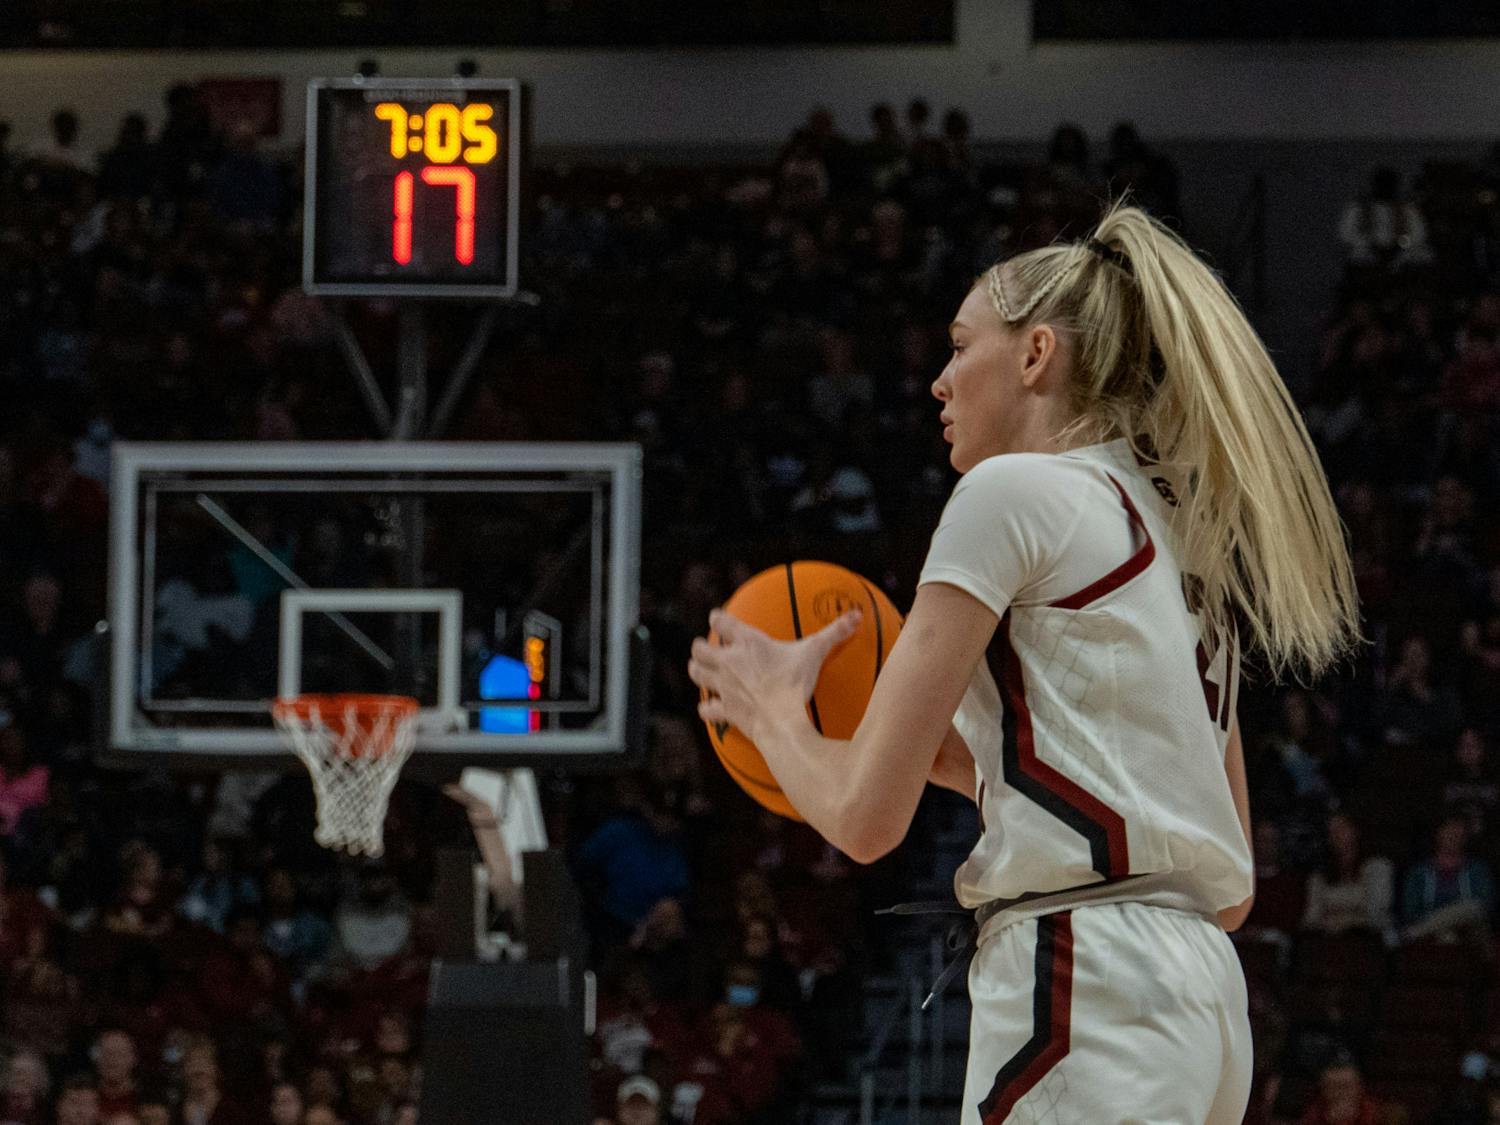 Freshman forward Chloe Kitts passes the ball during a game against Texas A&amp;M on Dec. 29, 2022. South Carolina defeated Texas 76-34 scoring its first in-conference win of the season.